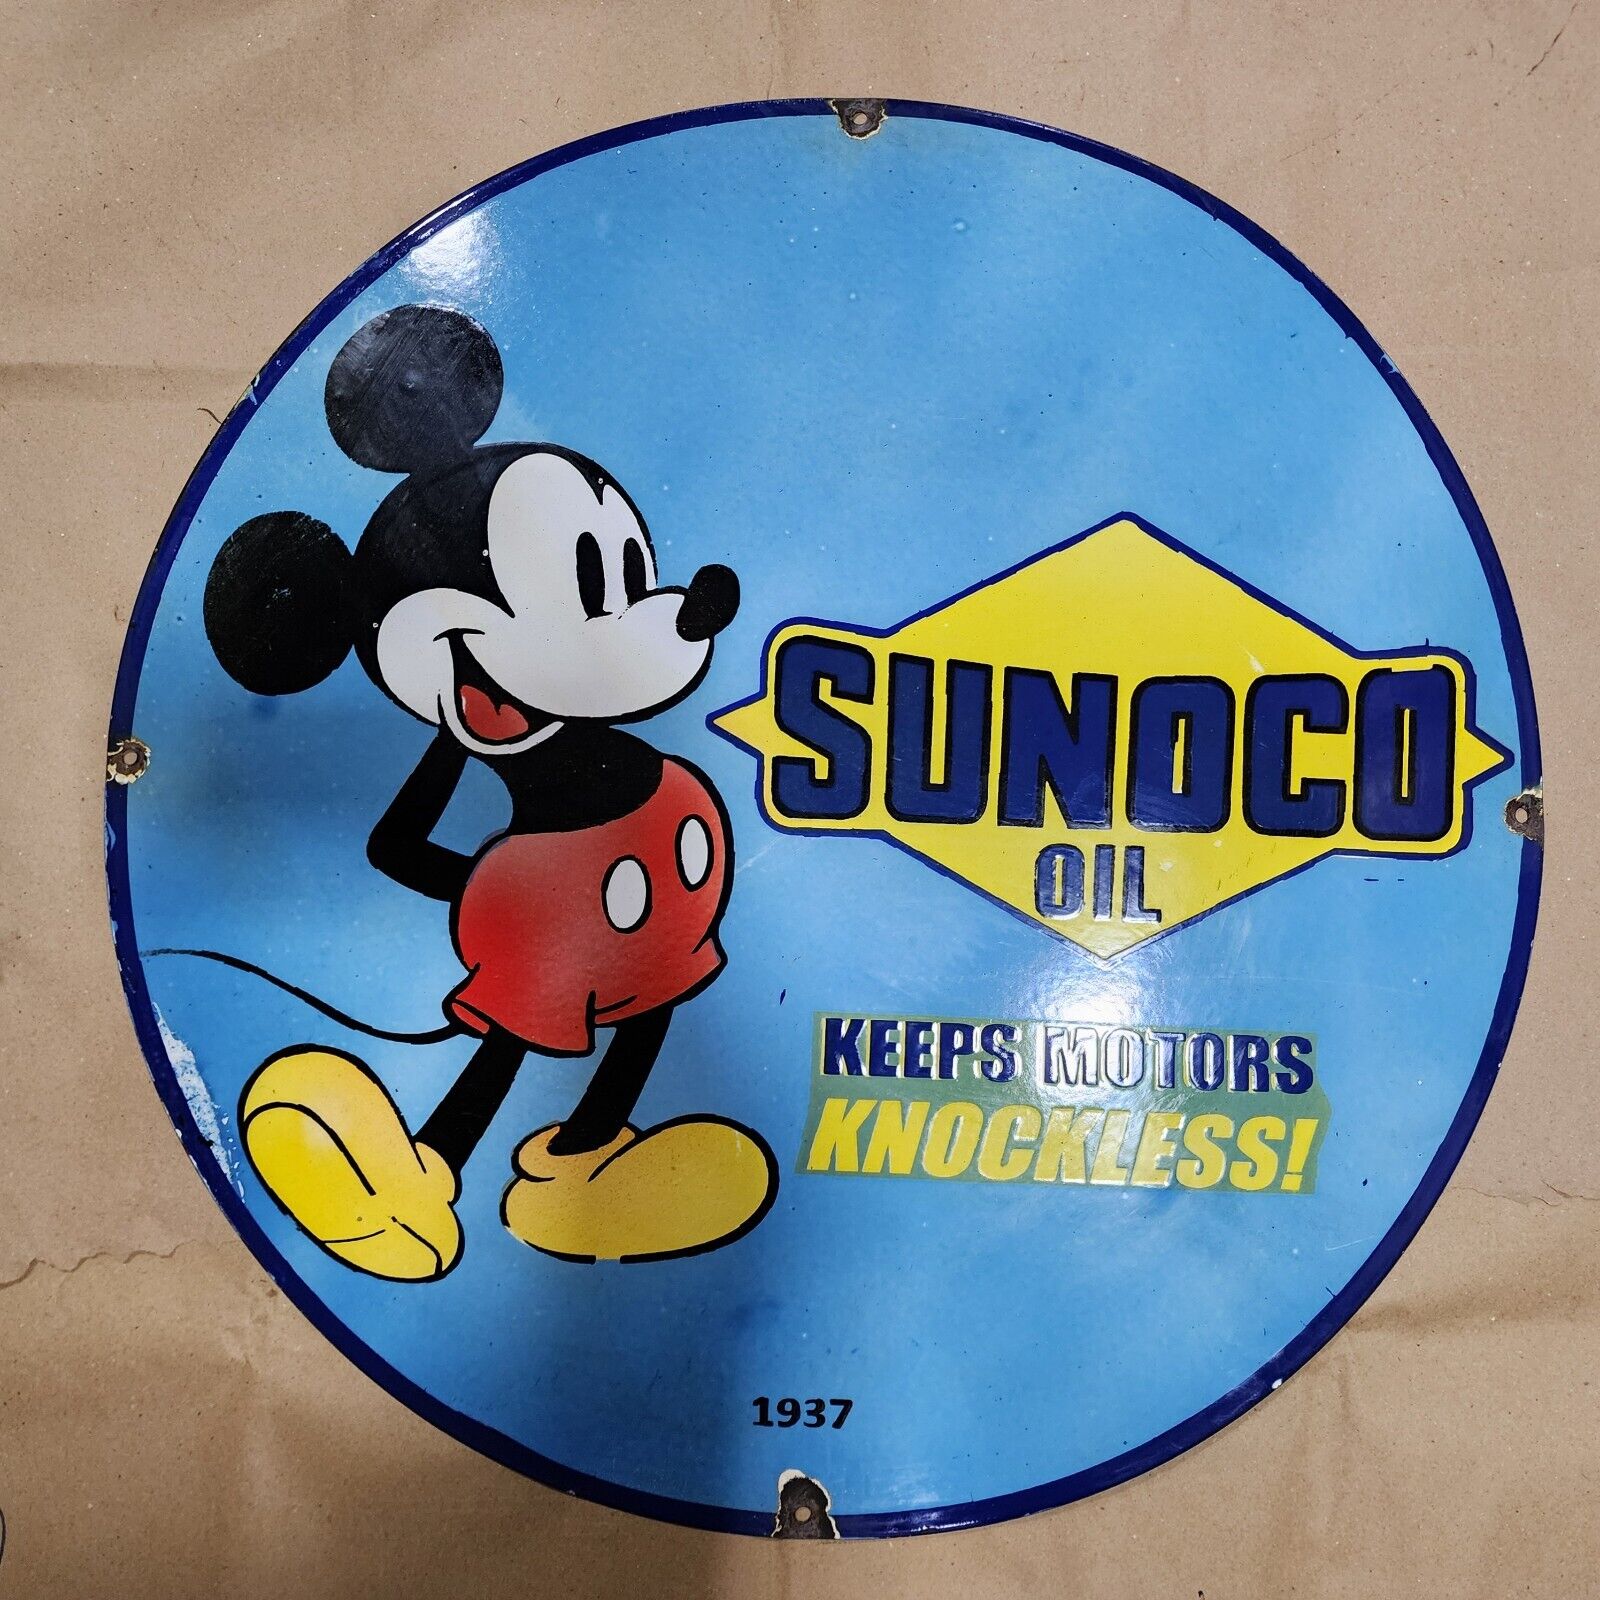 SUNOCO OIL PORCELAIN ENAMEL SIGN 30 INCHES ROUND